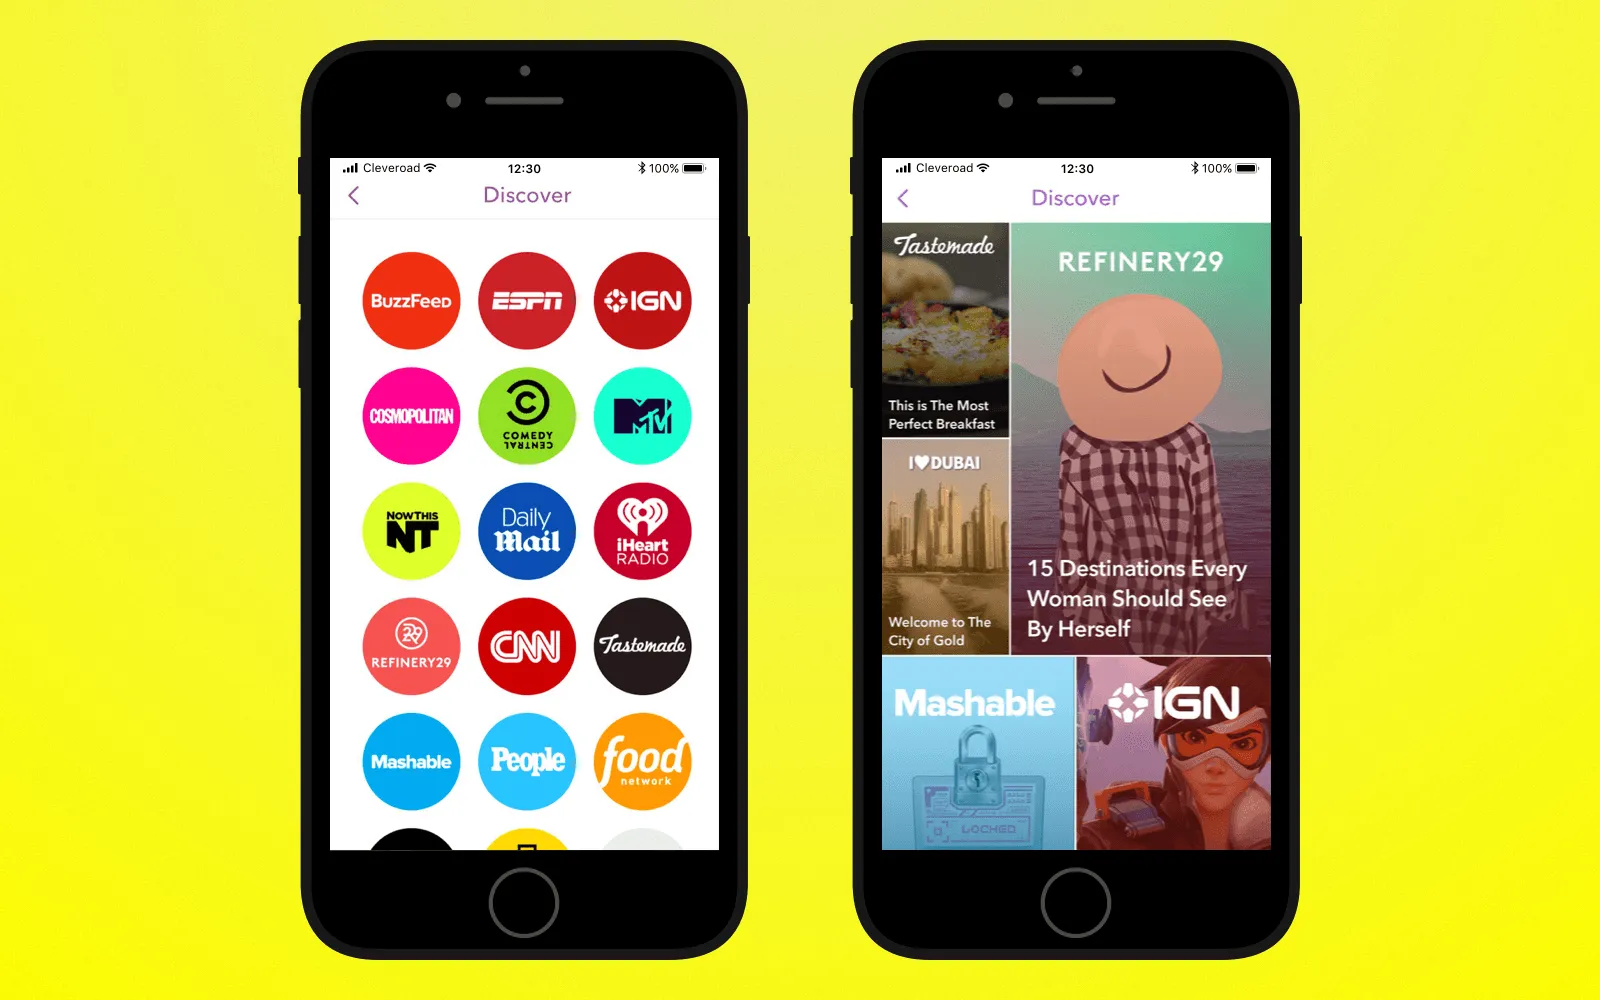 Add discover feature to create an app like Snapchat